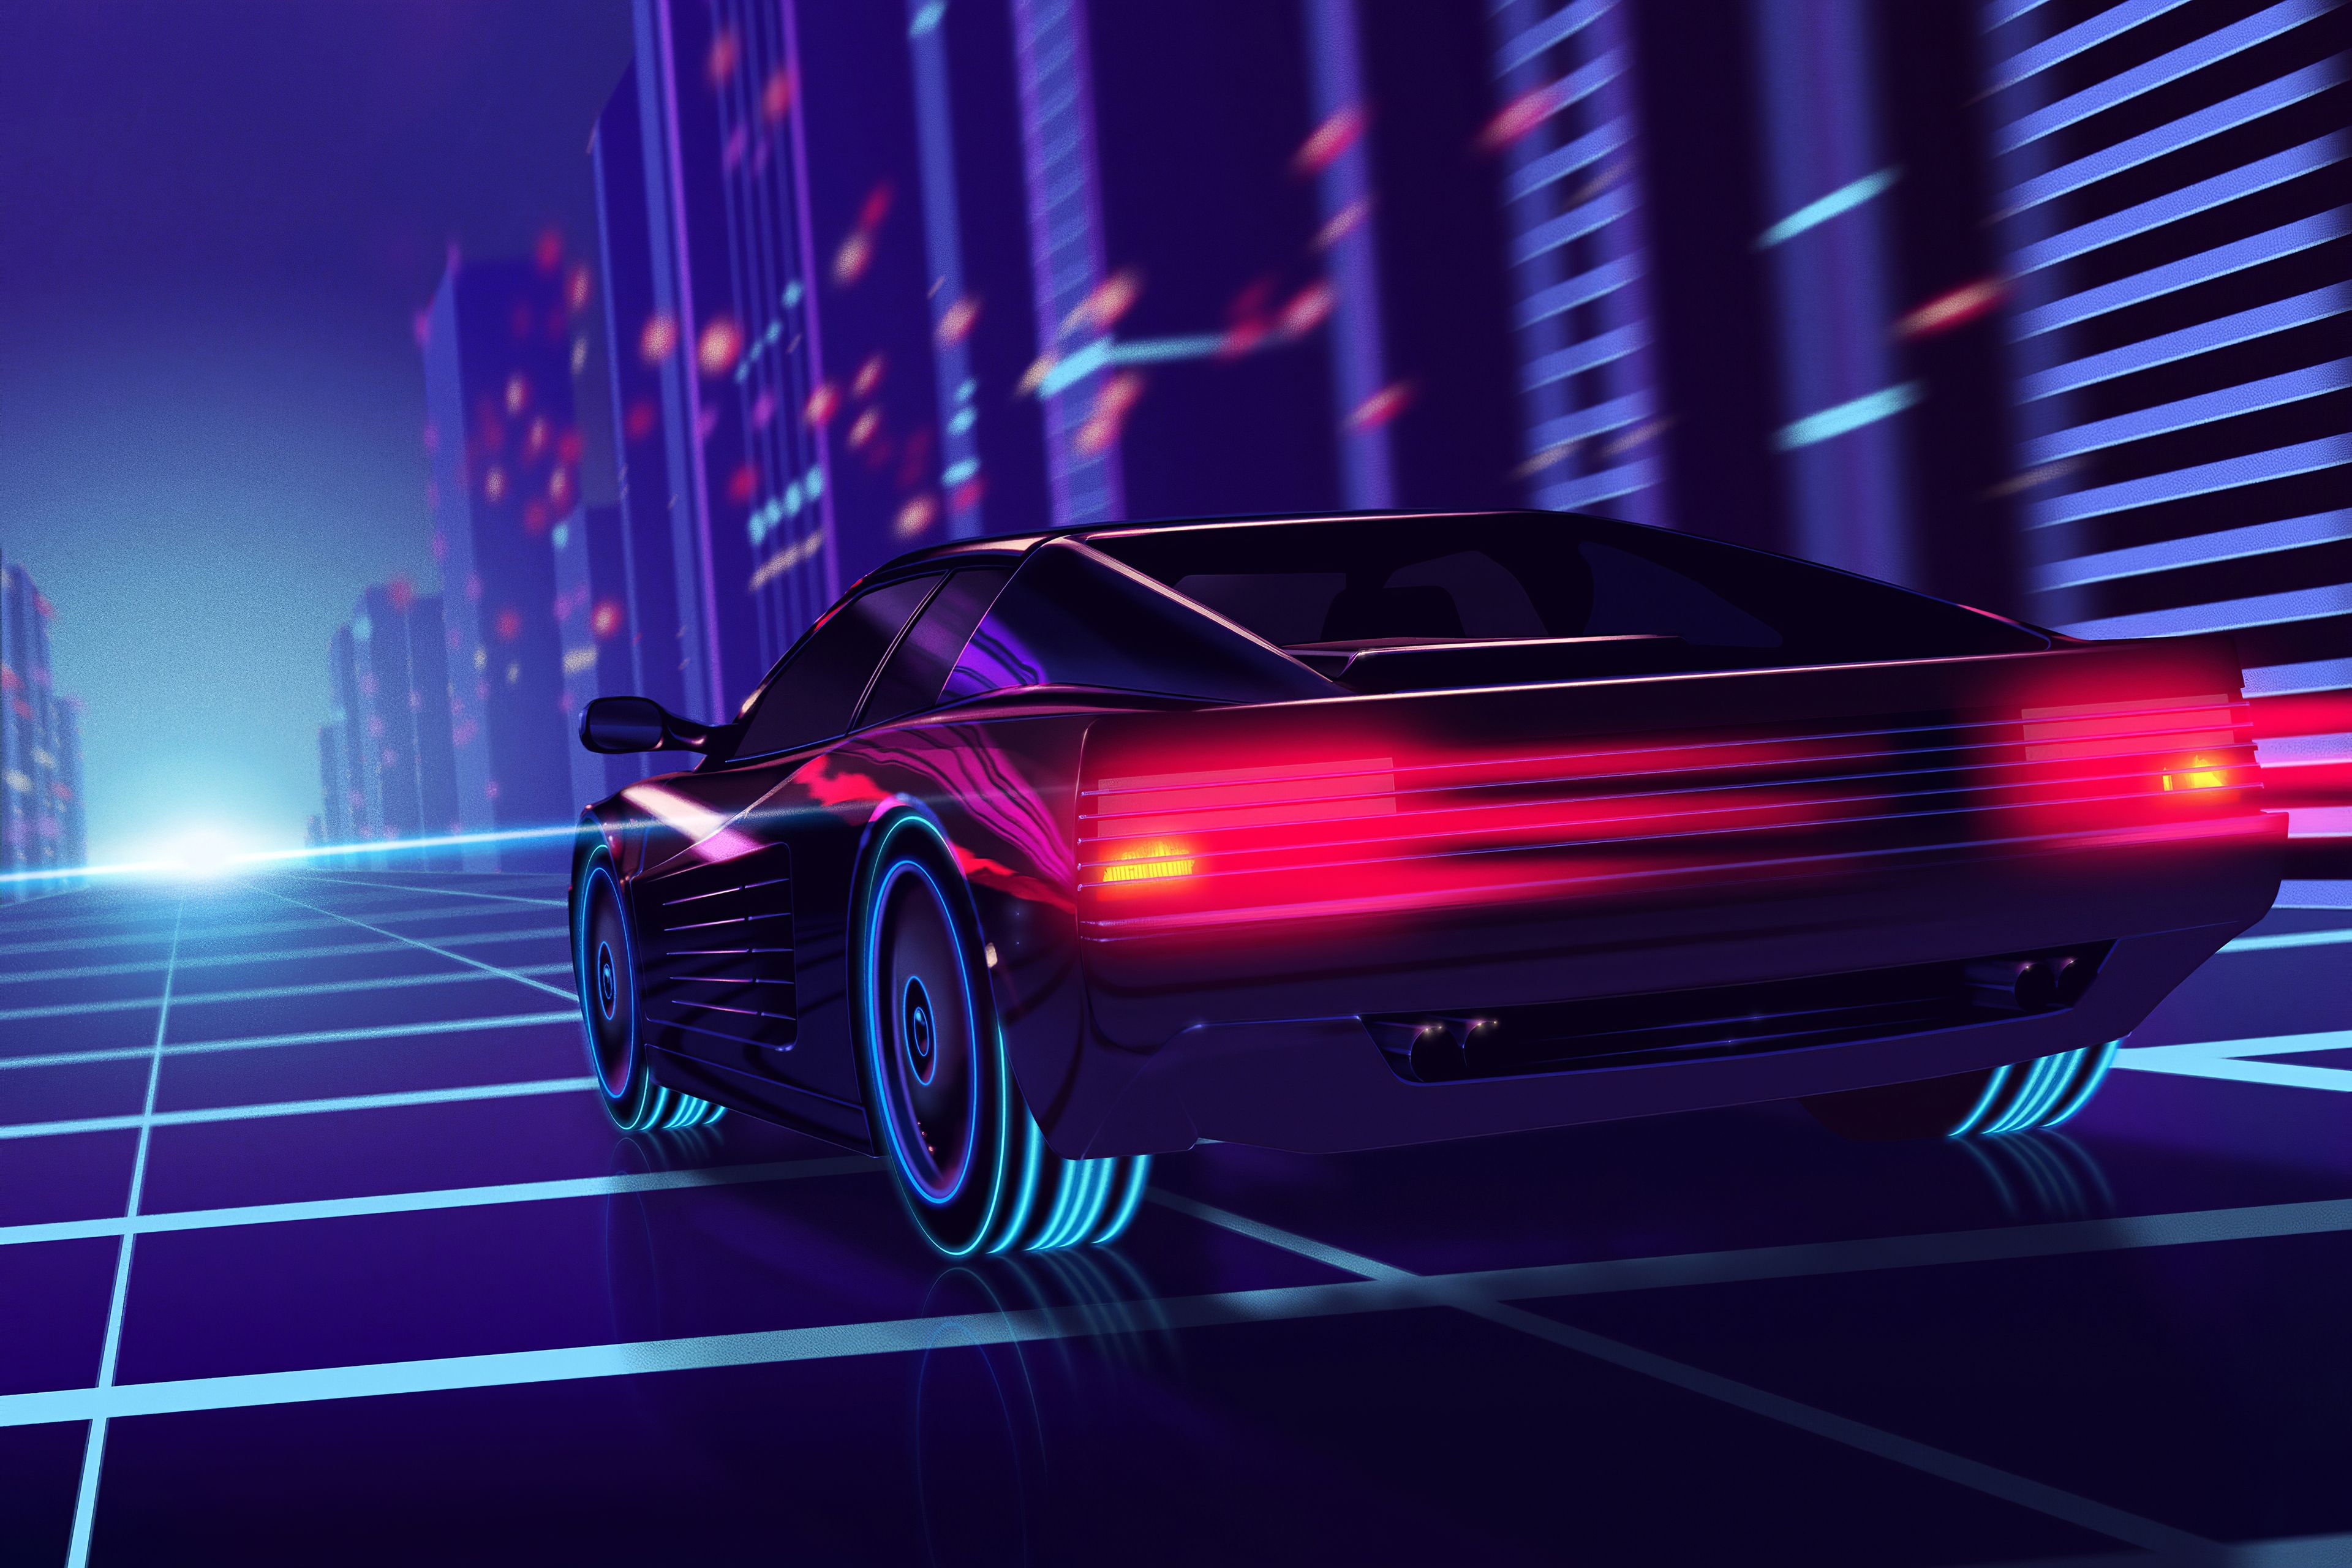 Wallpaper Synthwave, RetroWave art, Neon, Racing car, Night, 4K, Creative Graphics,. Wallpaper for iPhone, Android, Mobile and Desktop